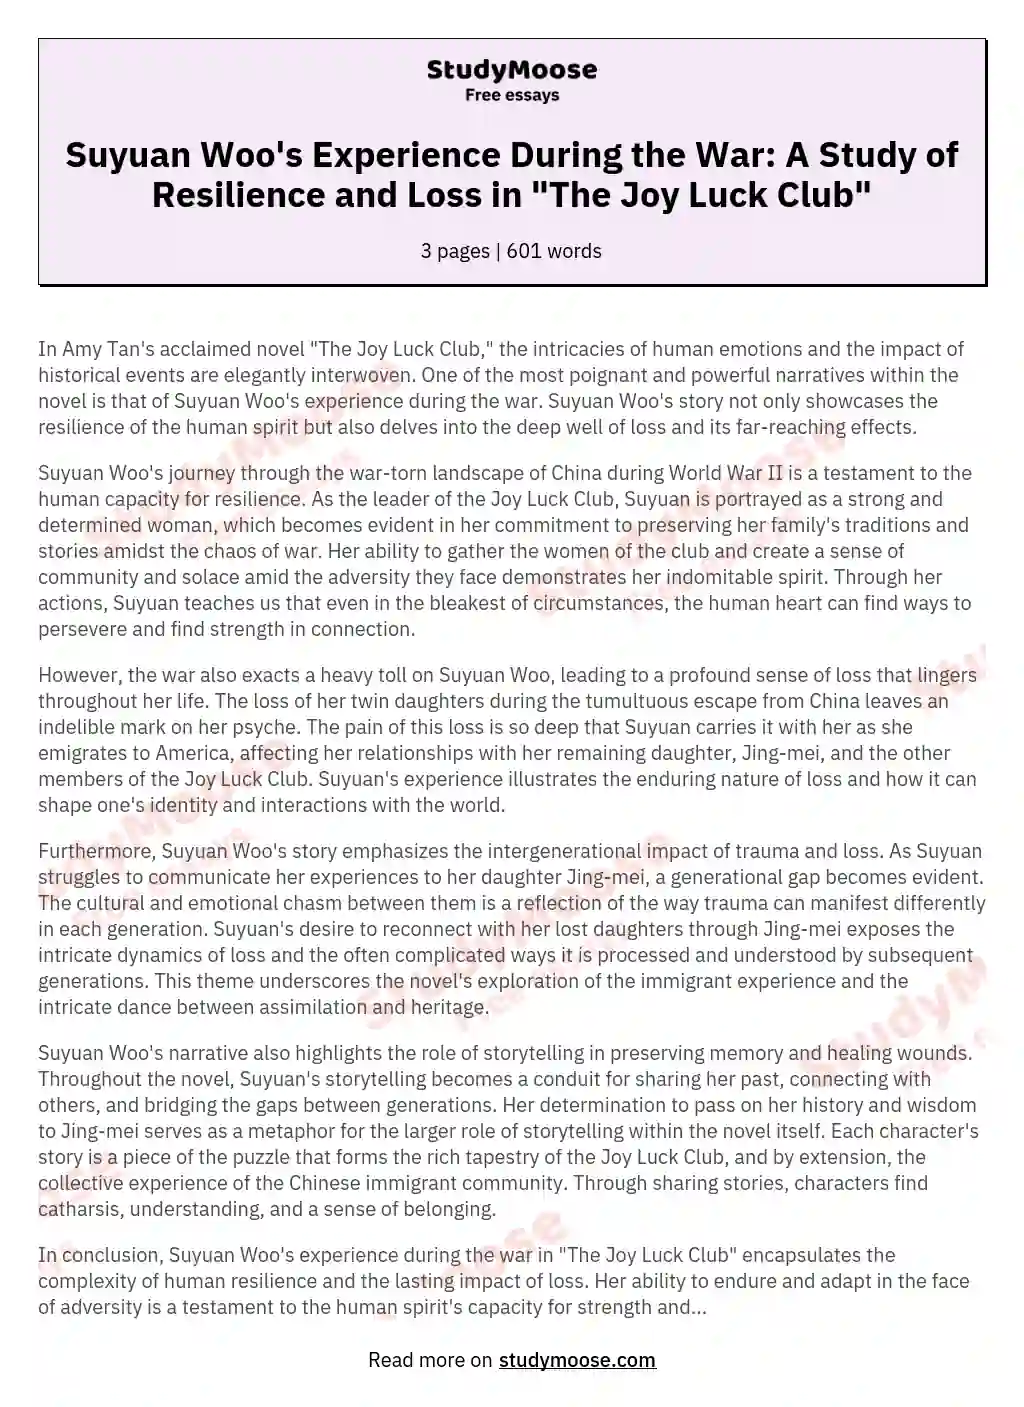 Suyuan Woo's Experience During the War: A Study of Resilience and Loss in "The Joy Luck Club" essay